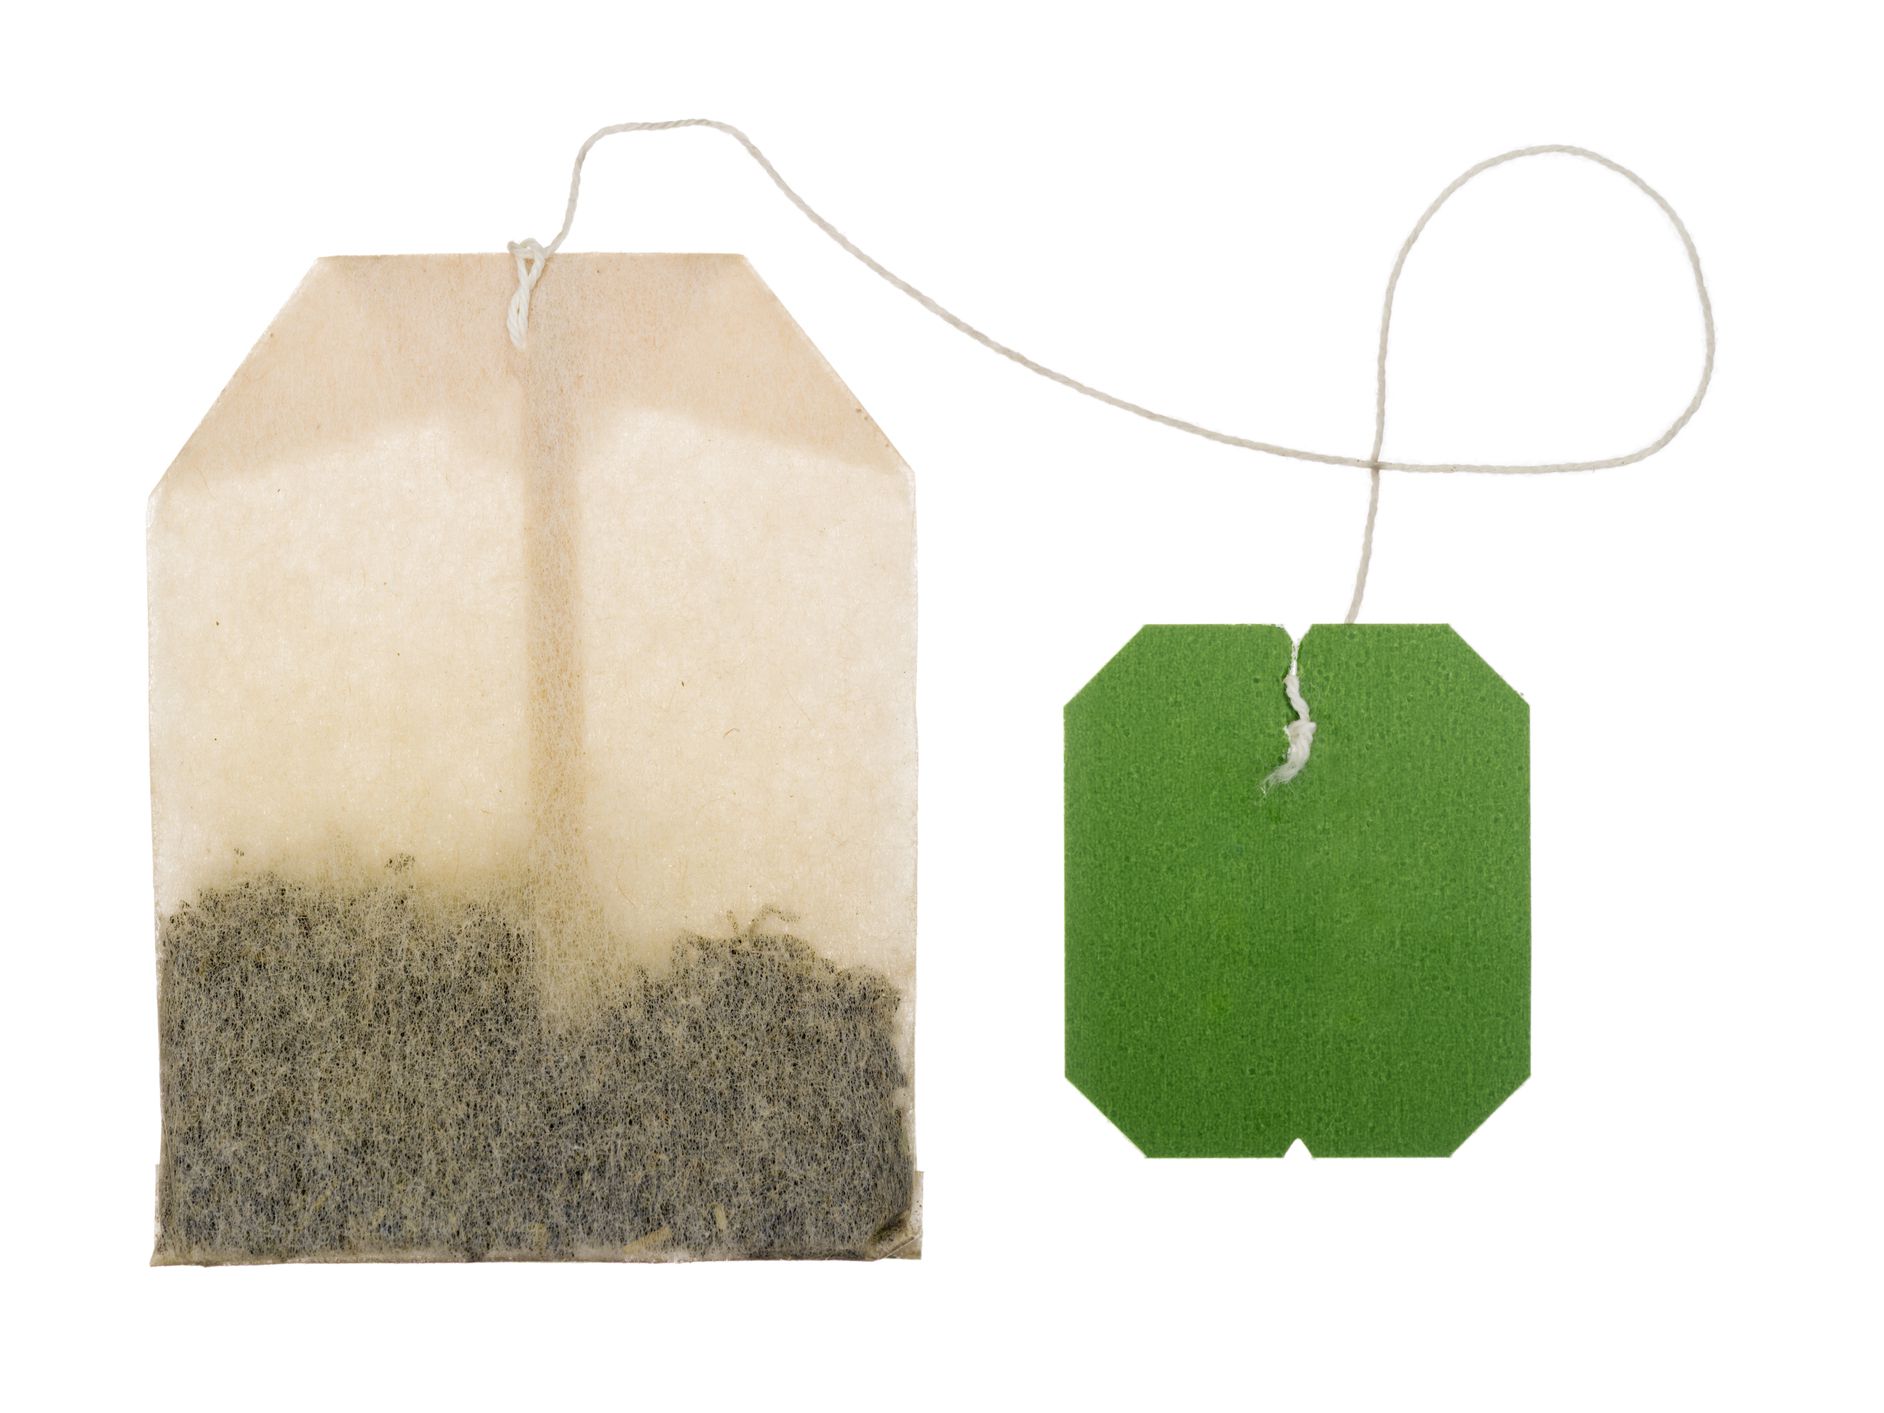 One way to keep your shoes smelling fresh is by using tea bags.